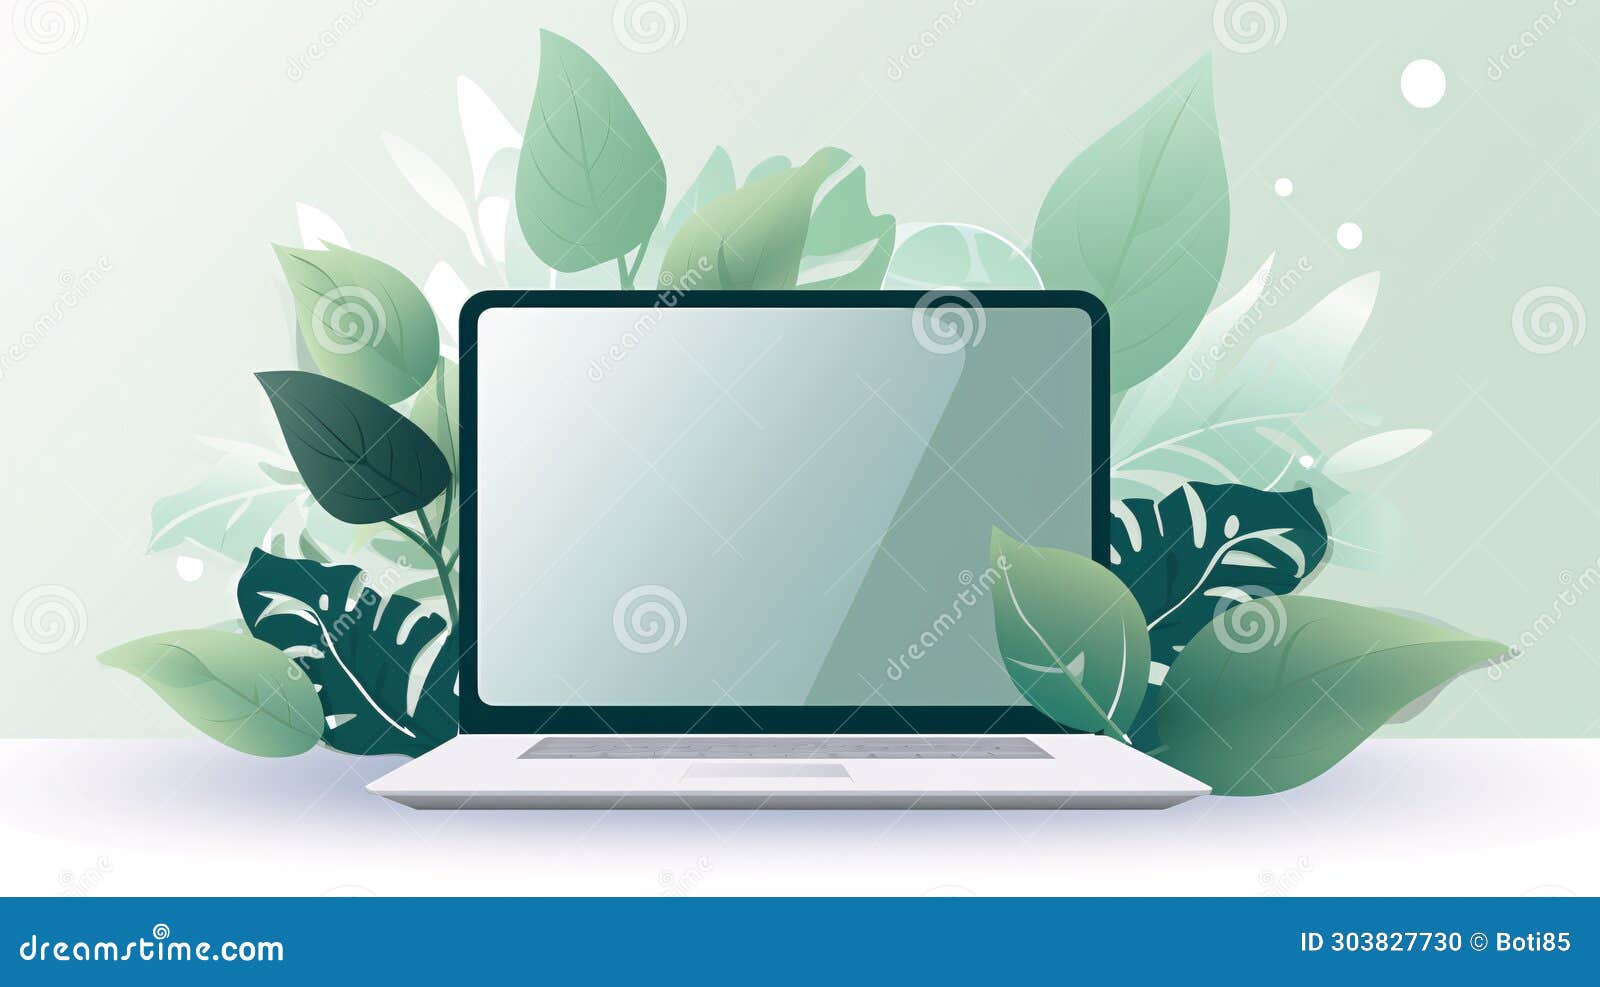 laptop in green vegetation, representing eco friendliness in build materials